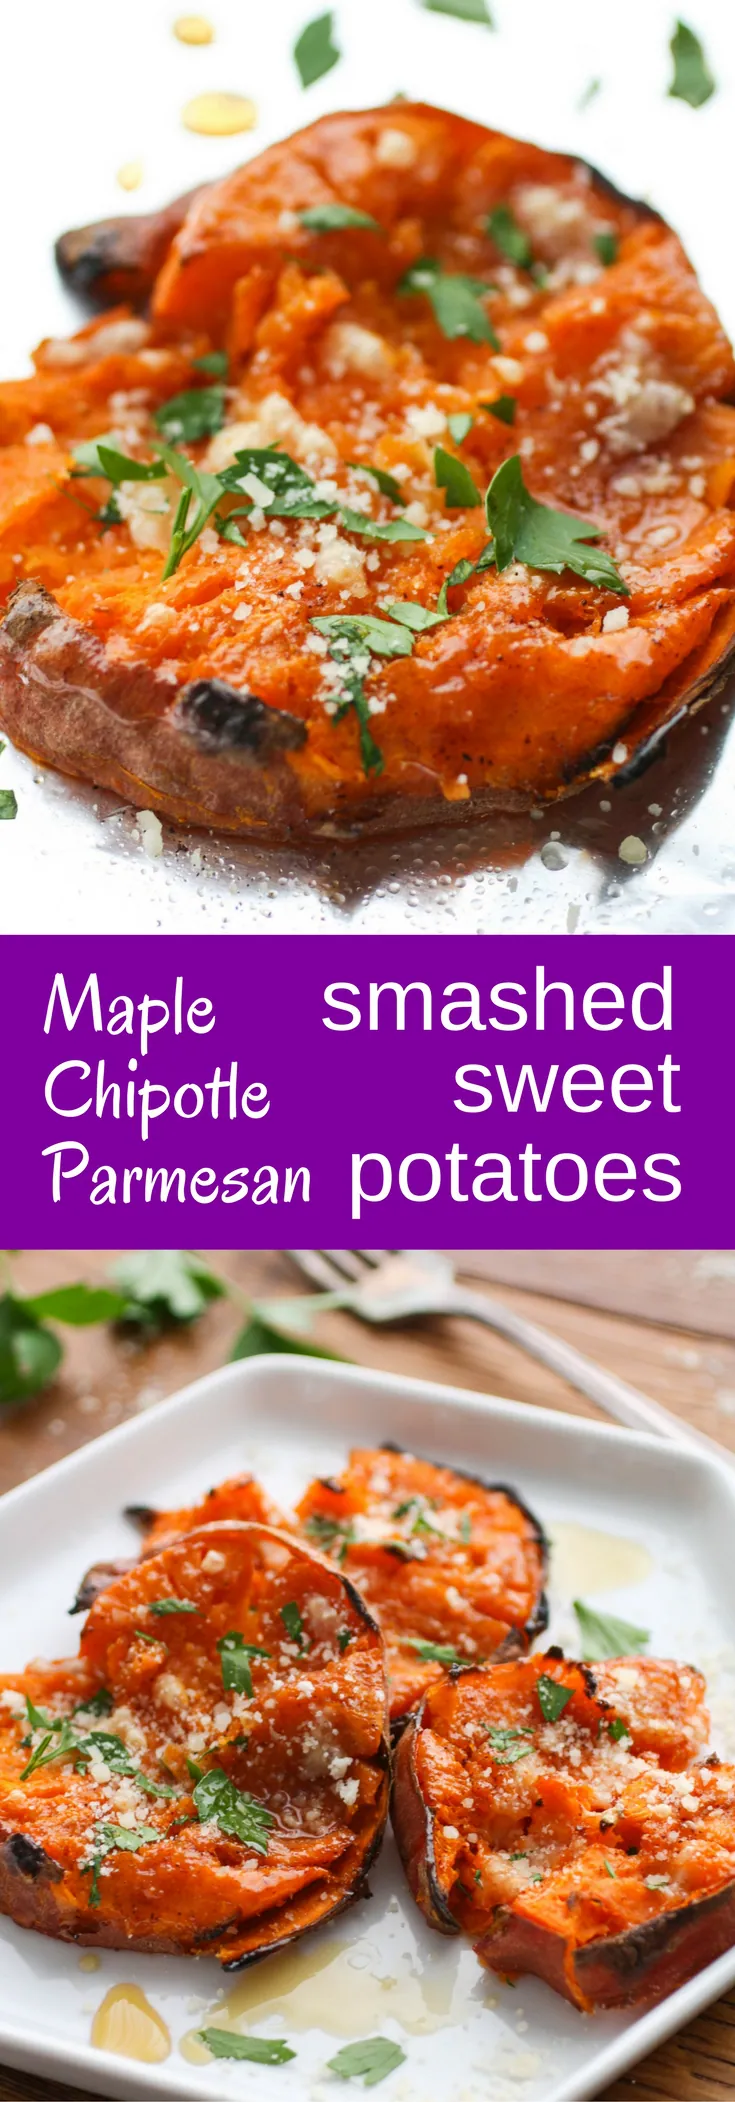 Maple Chipotle Parmesan Smashed Sweet Potatoes are a fun side dish that taste amazing, too! Makes these potatoes any night of the week.